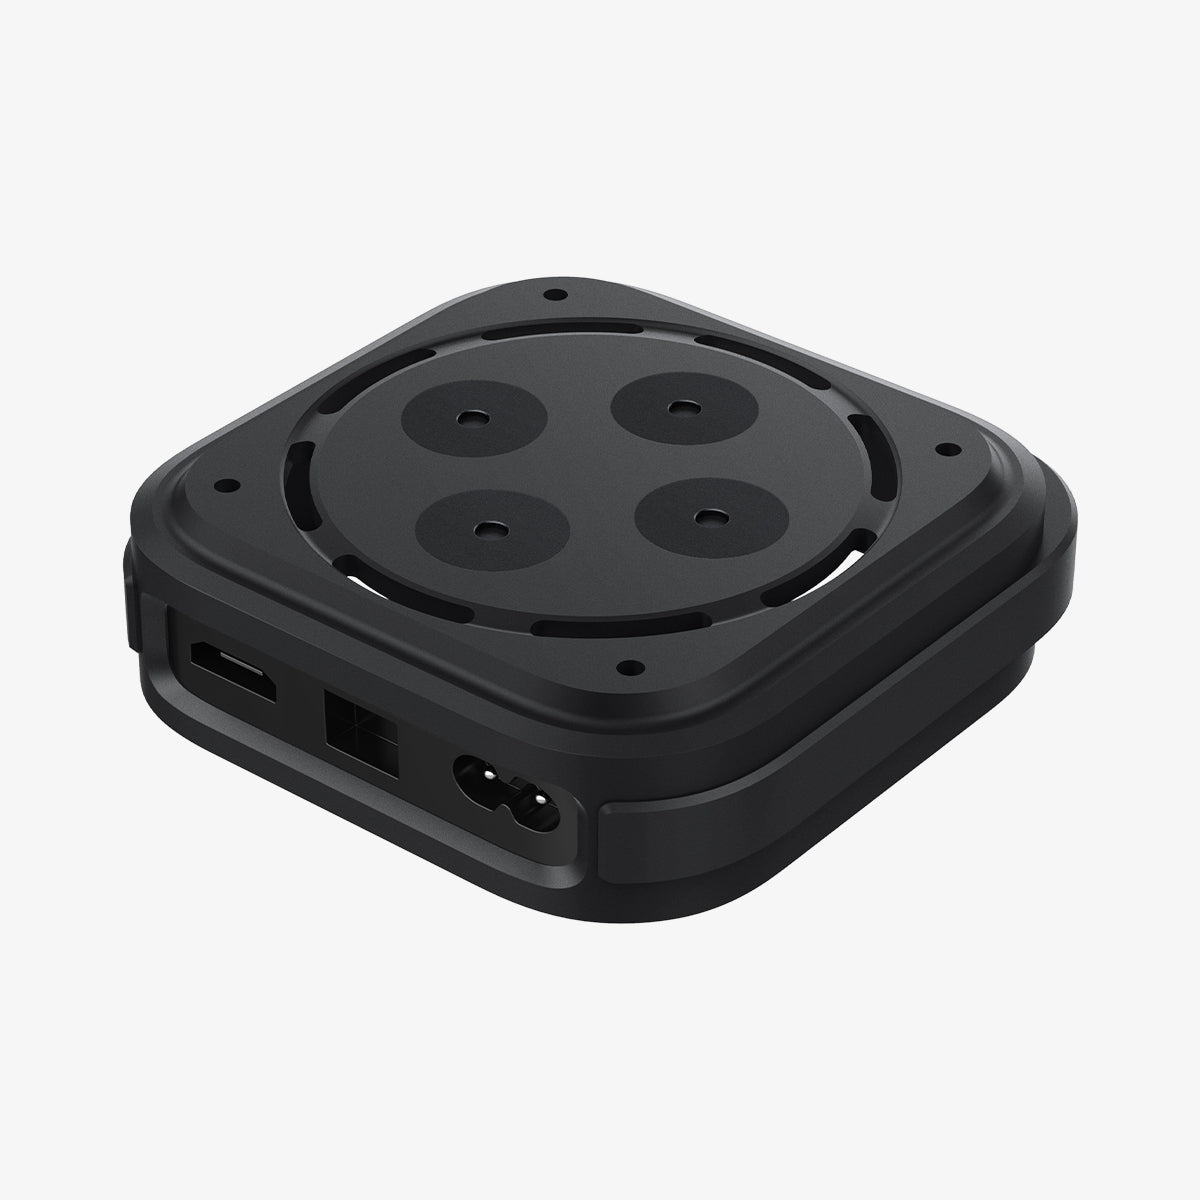 AMP05858 - Apple TV 4K (3rd Gen) Mount Silicone Fit in black showing the bottom and side